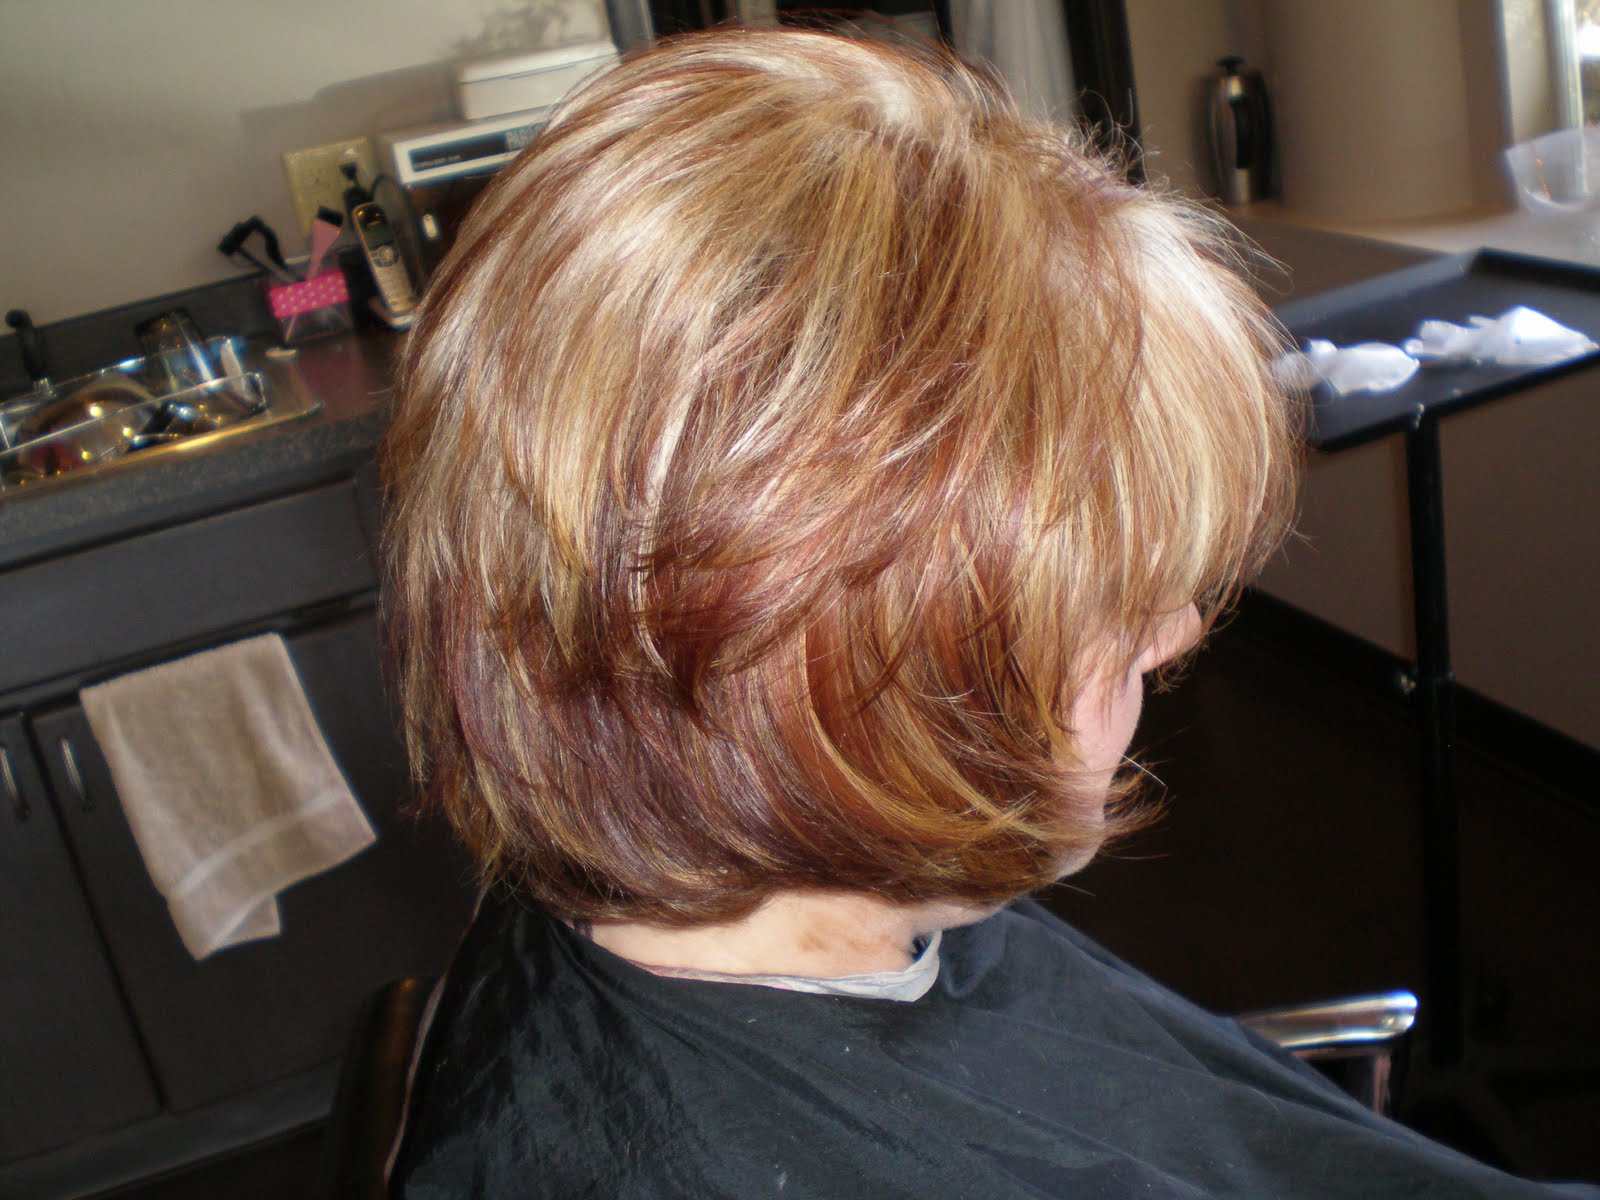 Auburn and Blonde Highlights - wide 2